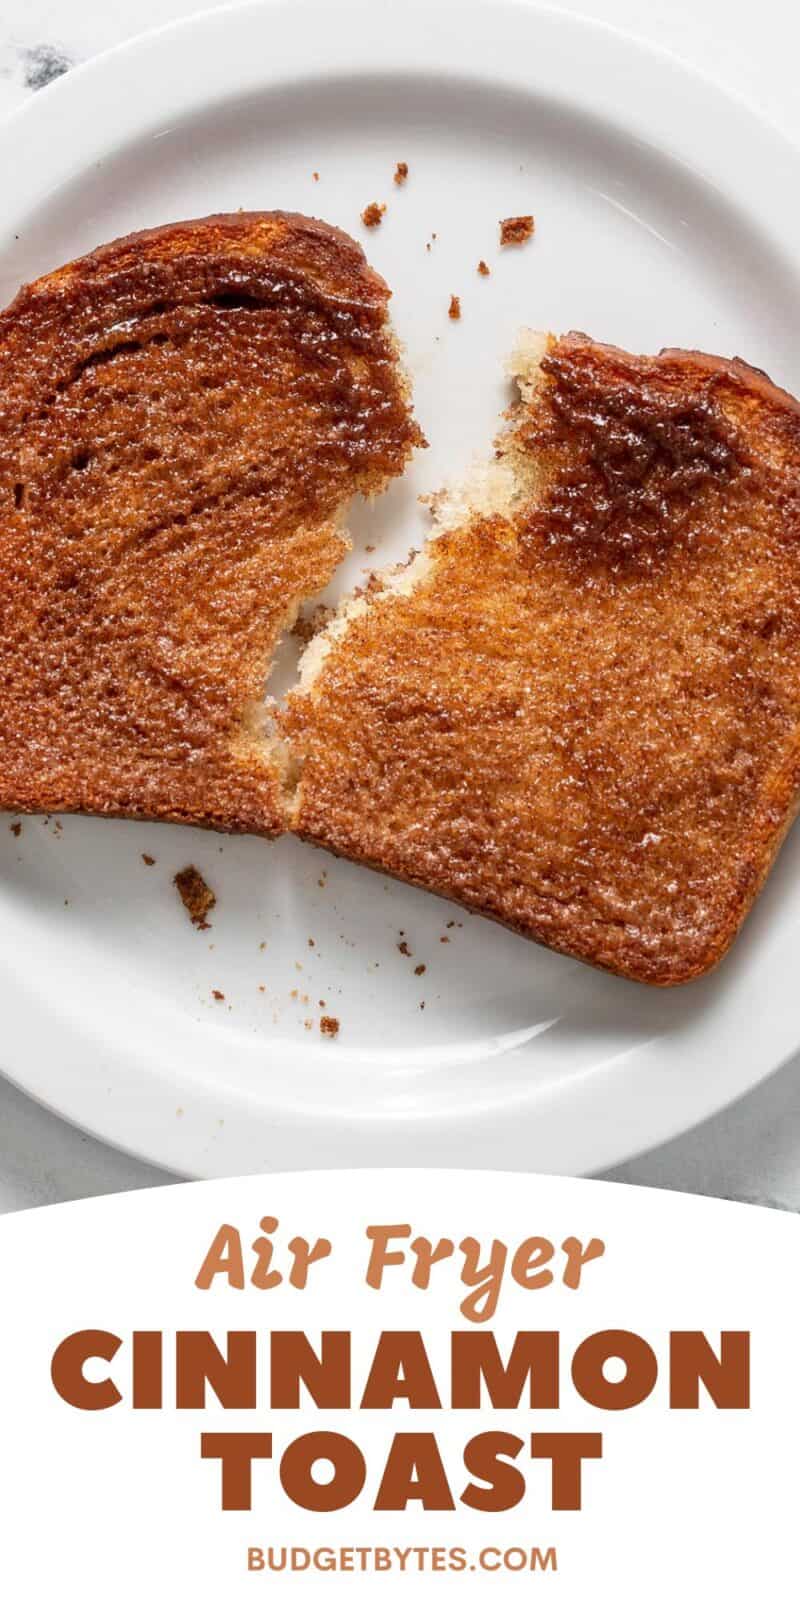 Overhead shot of ripped air fried cinnamon toast on white plate.